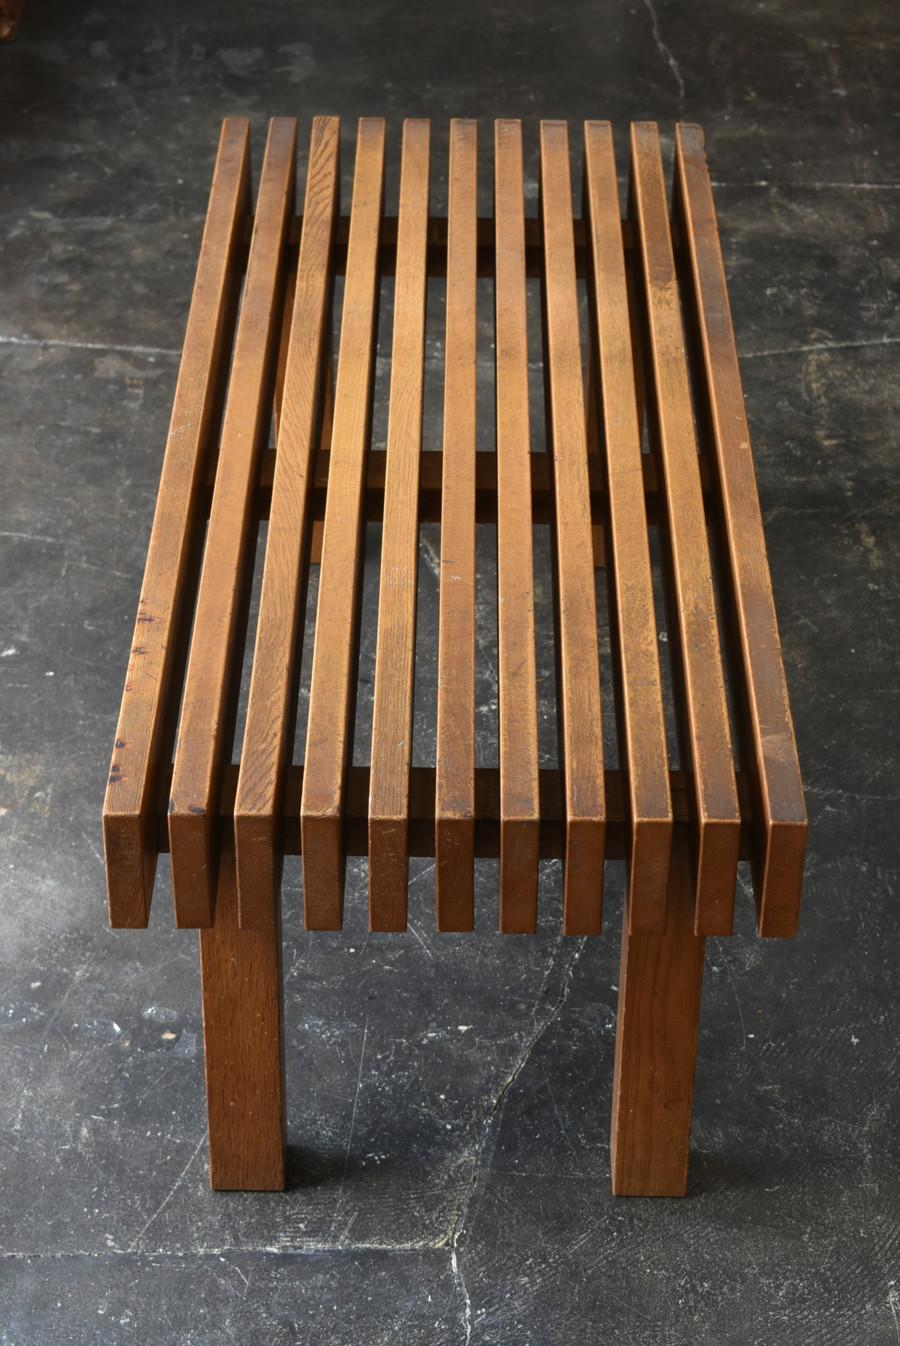 20th Century Japanese Wooden Bench/Design like Charlotte Perriand/Showa/1950-1980